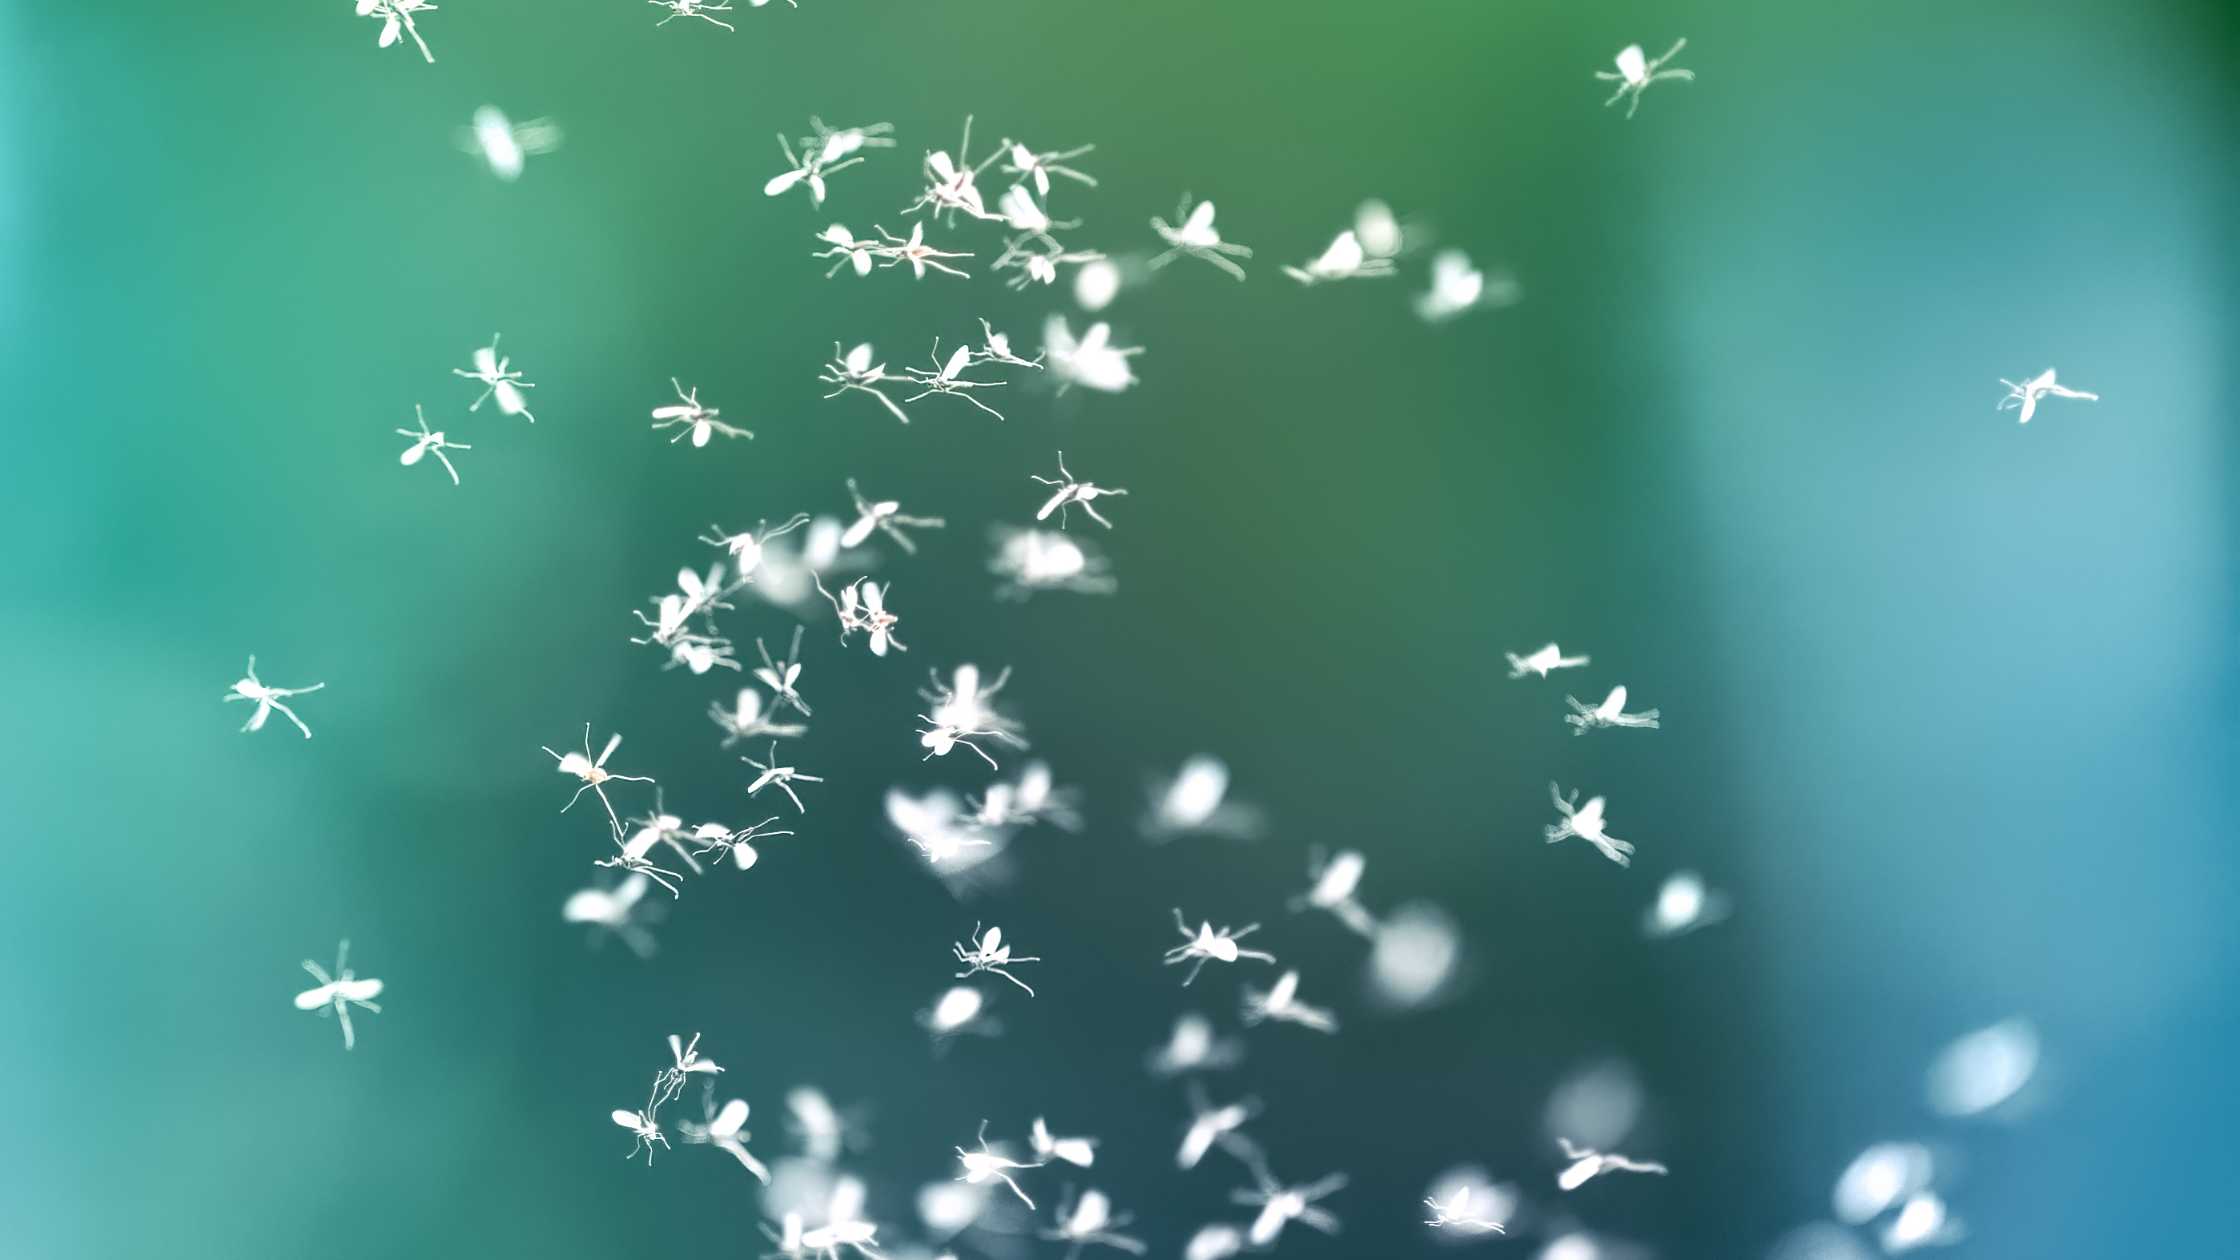 Understanding the Spiritual Meaning of Seeing Flies in a Dream